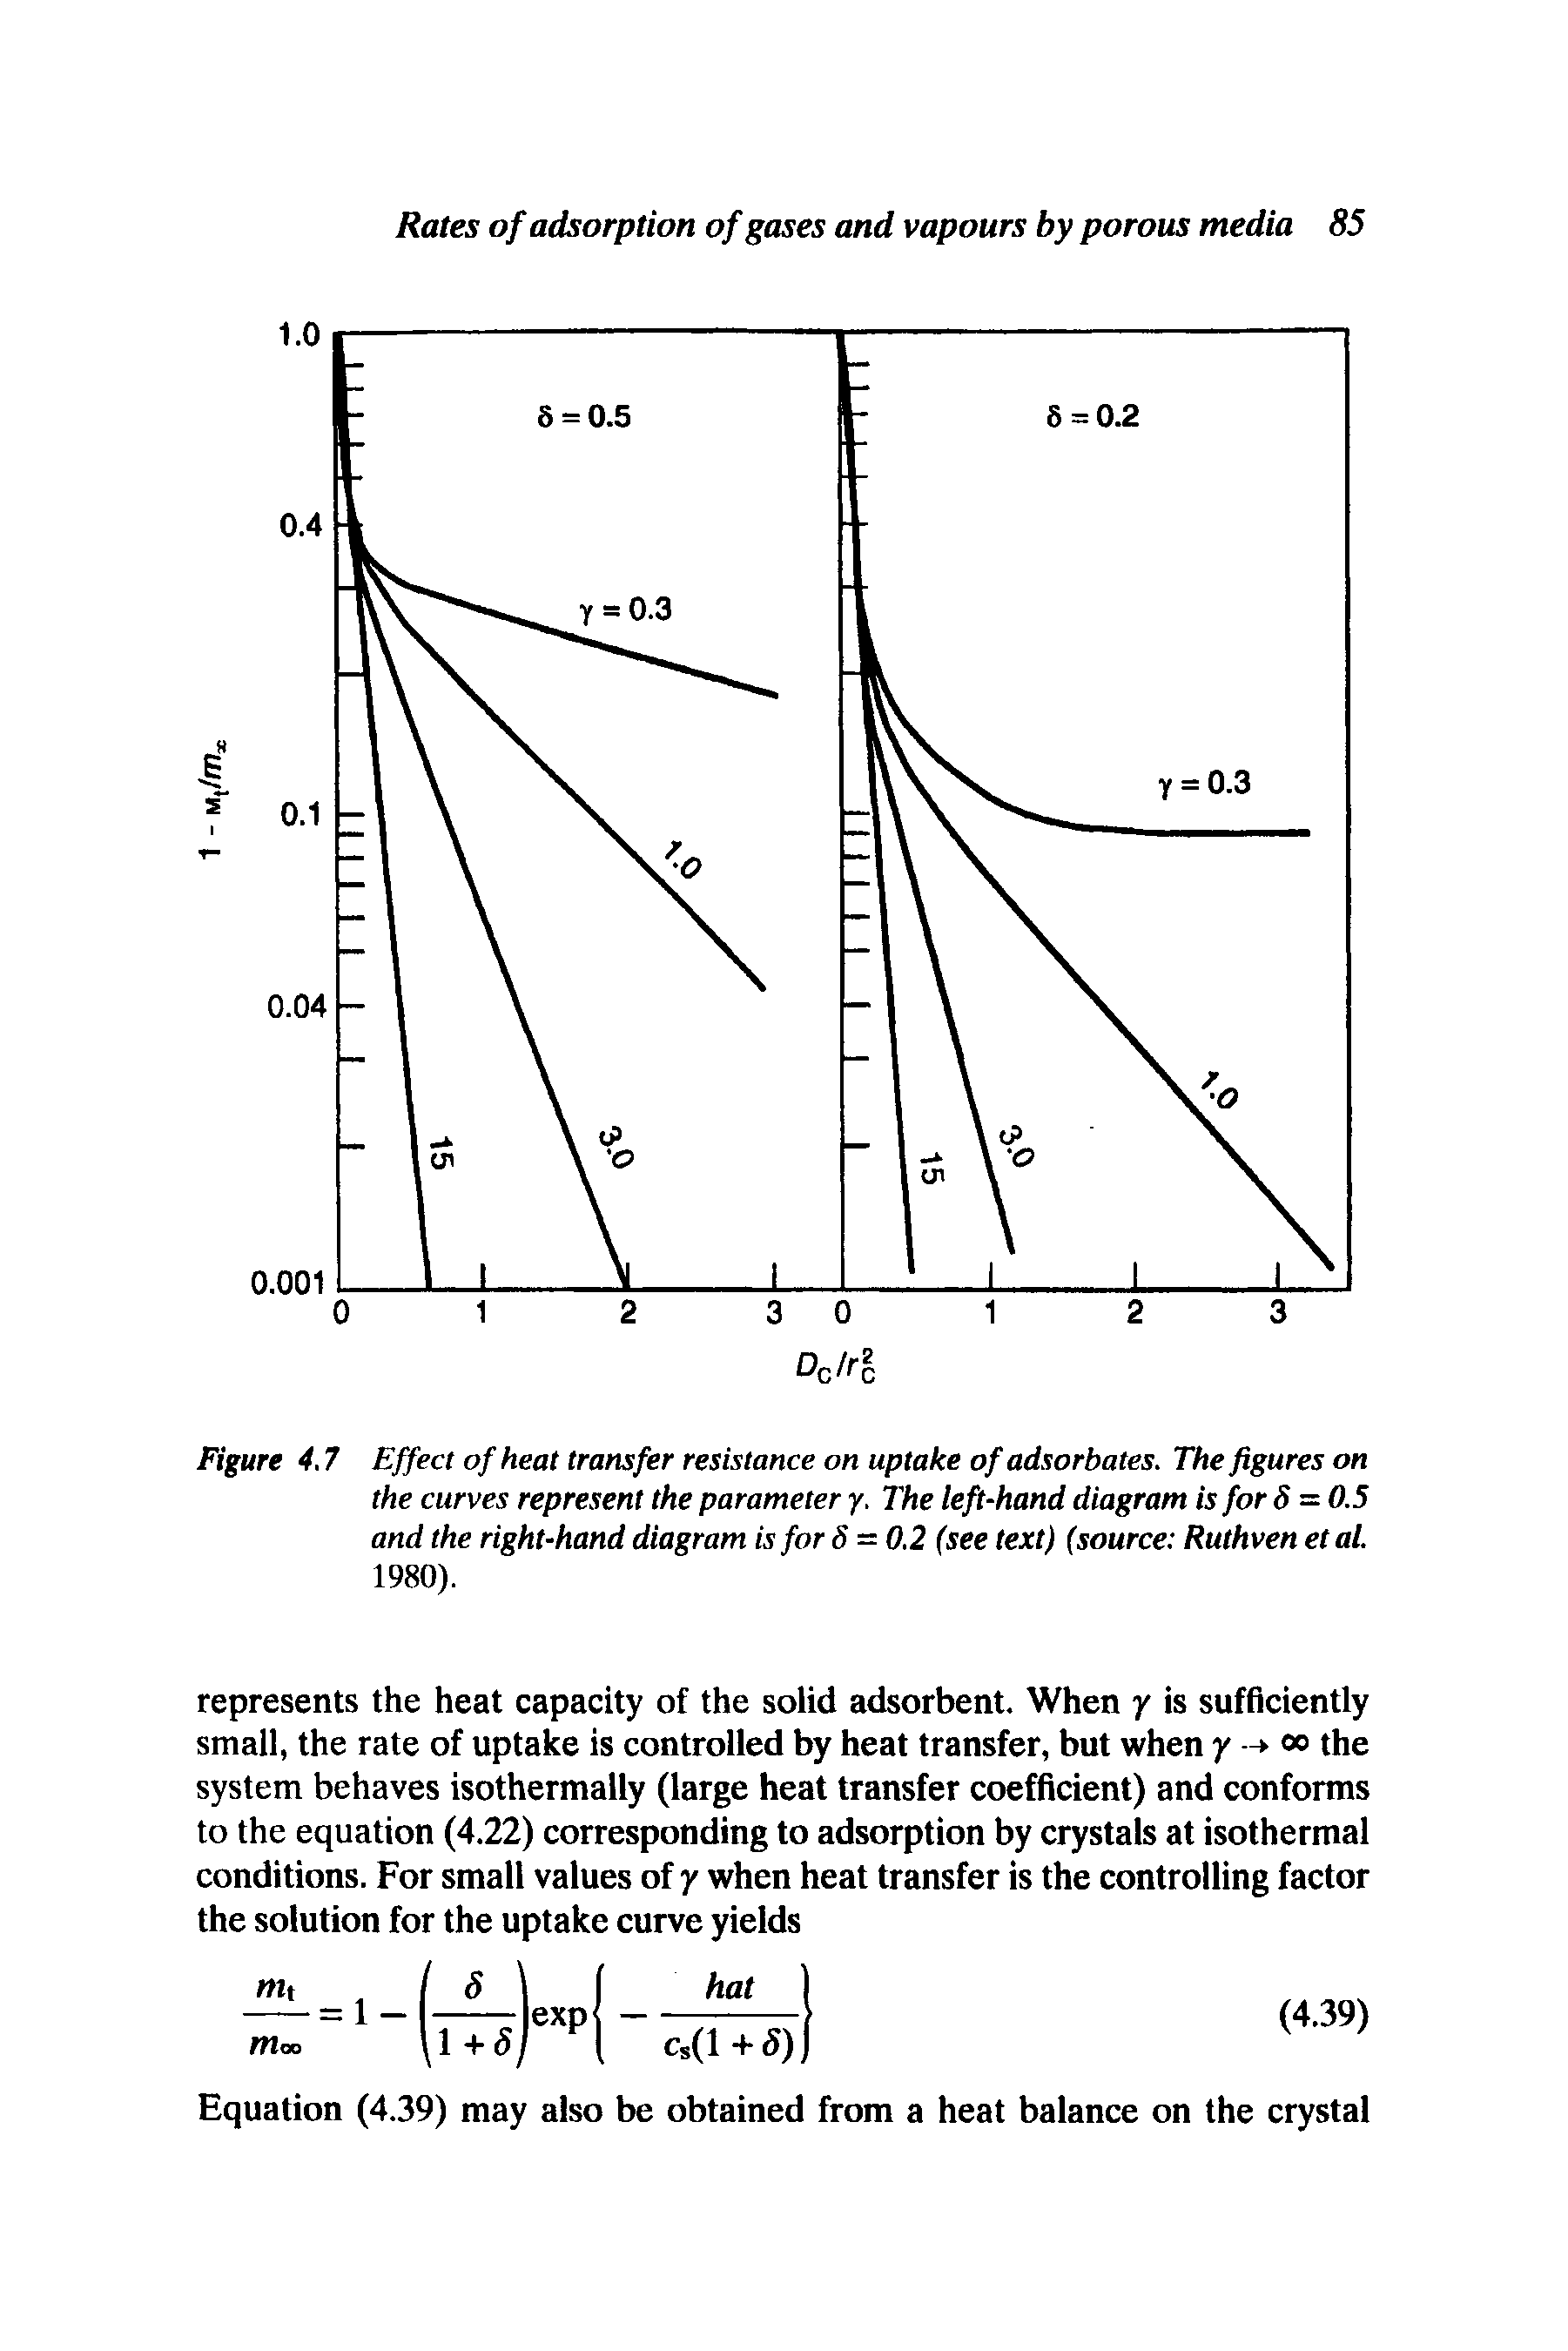 Figure 4,7 Effect of heat transfer resistance on uptake of adsorbates. The figures on the curves represent the parameter y. The left-hand diagram is for 6 = 0.5 and the right-hand diagram is for S = 0.2 (see text) (source Ruthven etal. 1980).